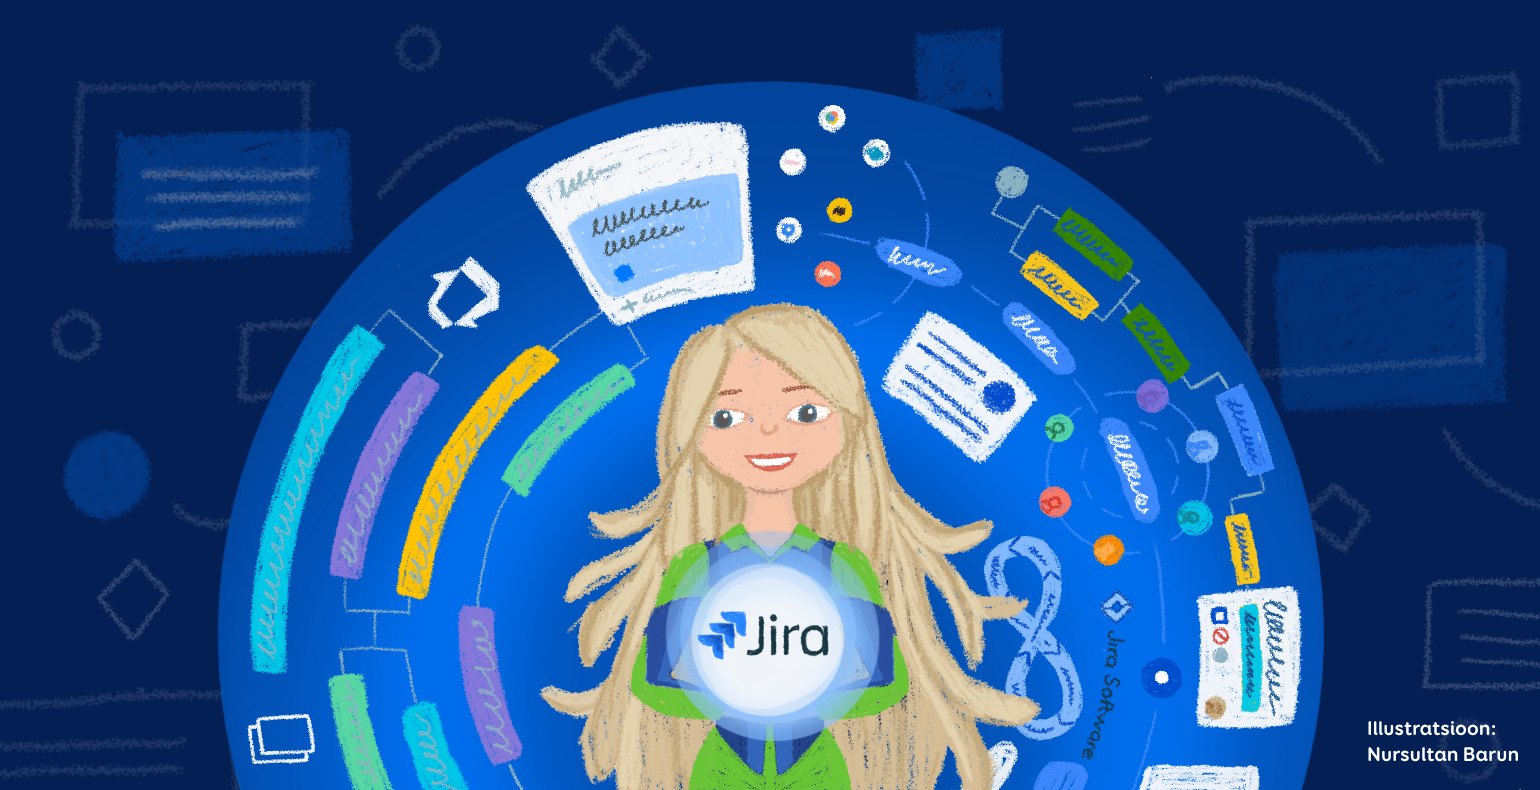 Illustration of implementing Jira